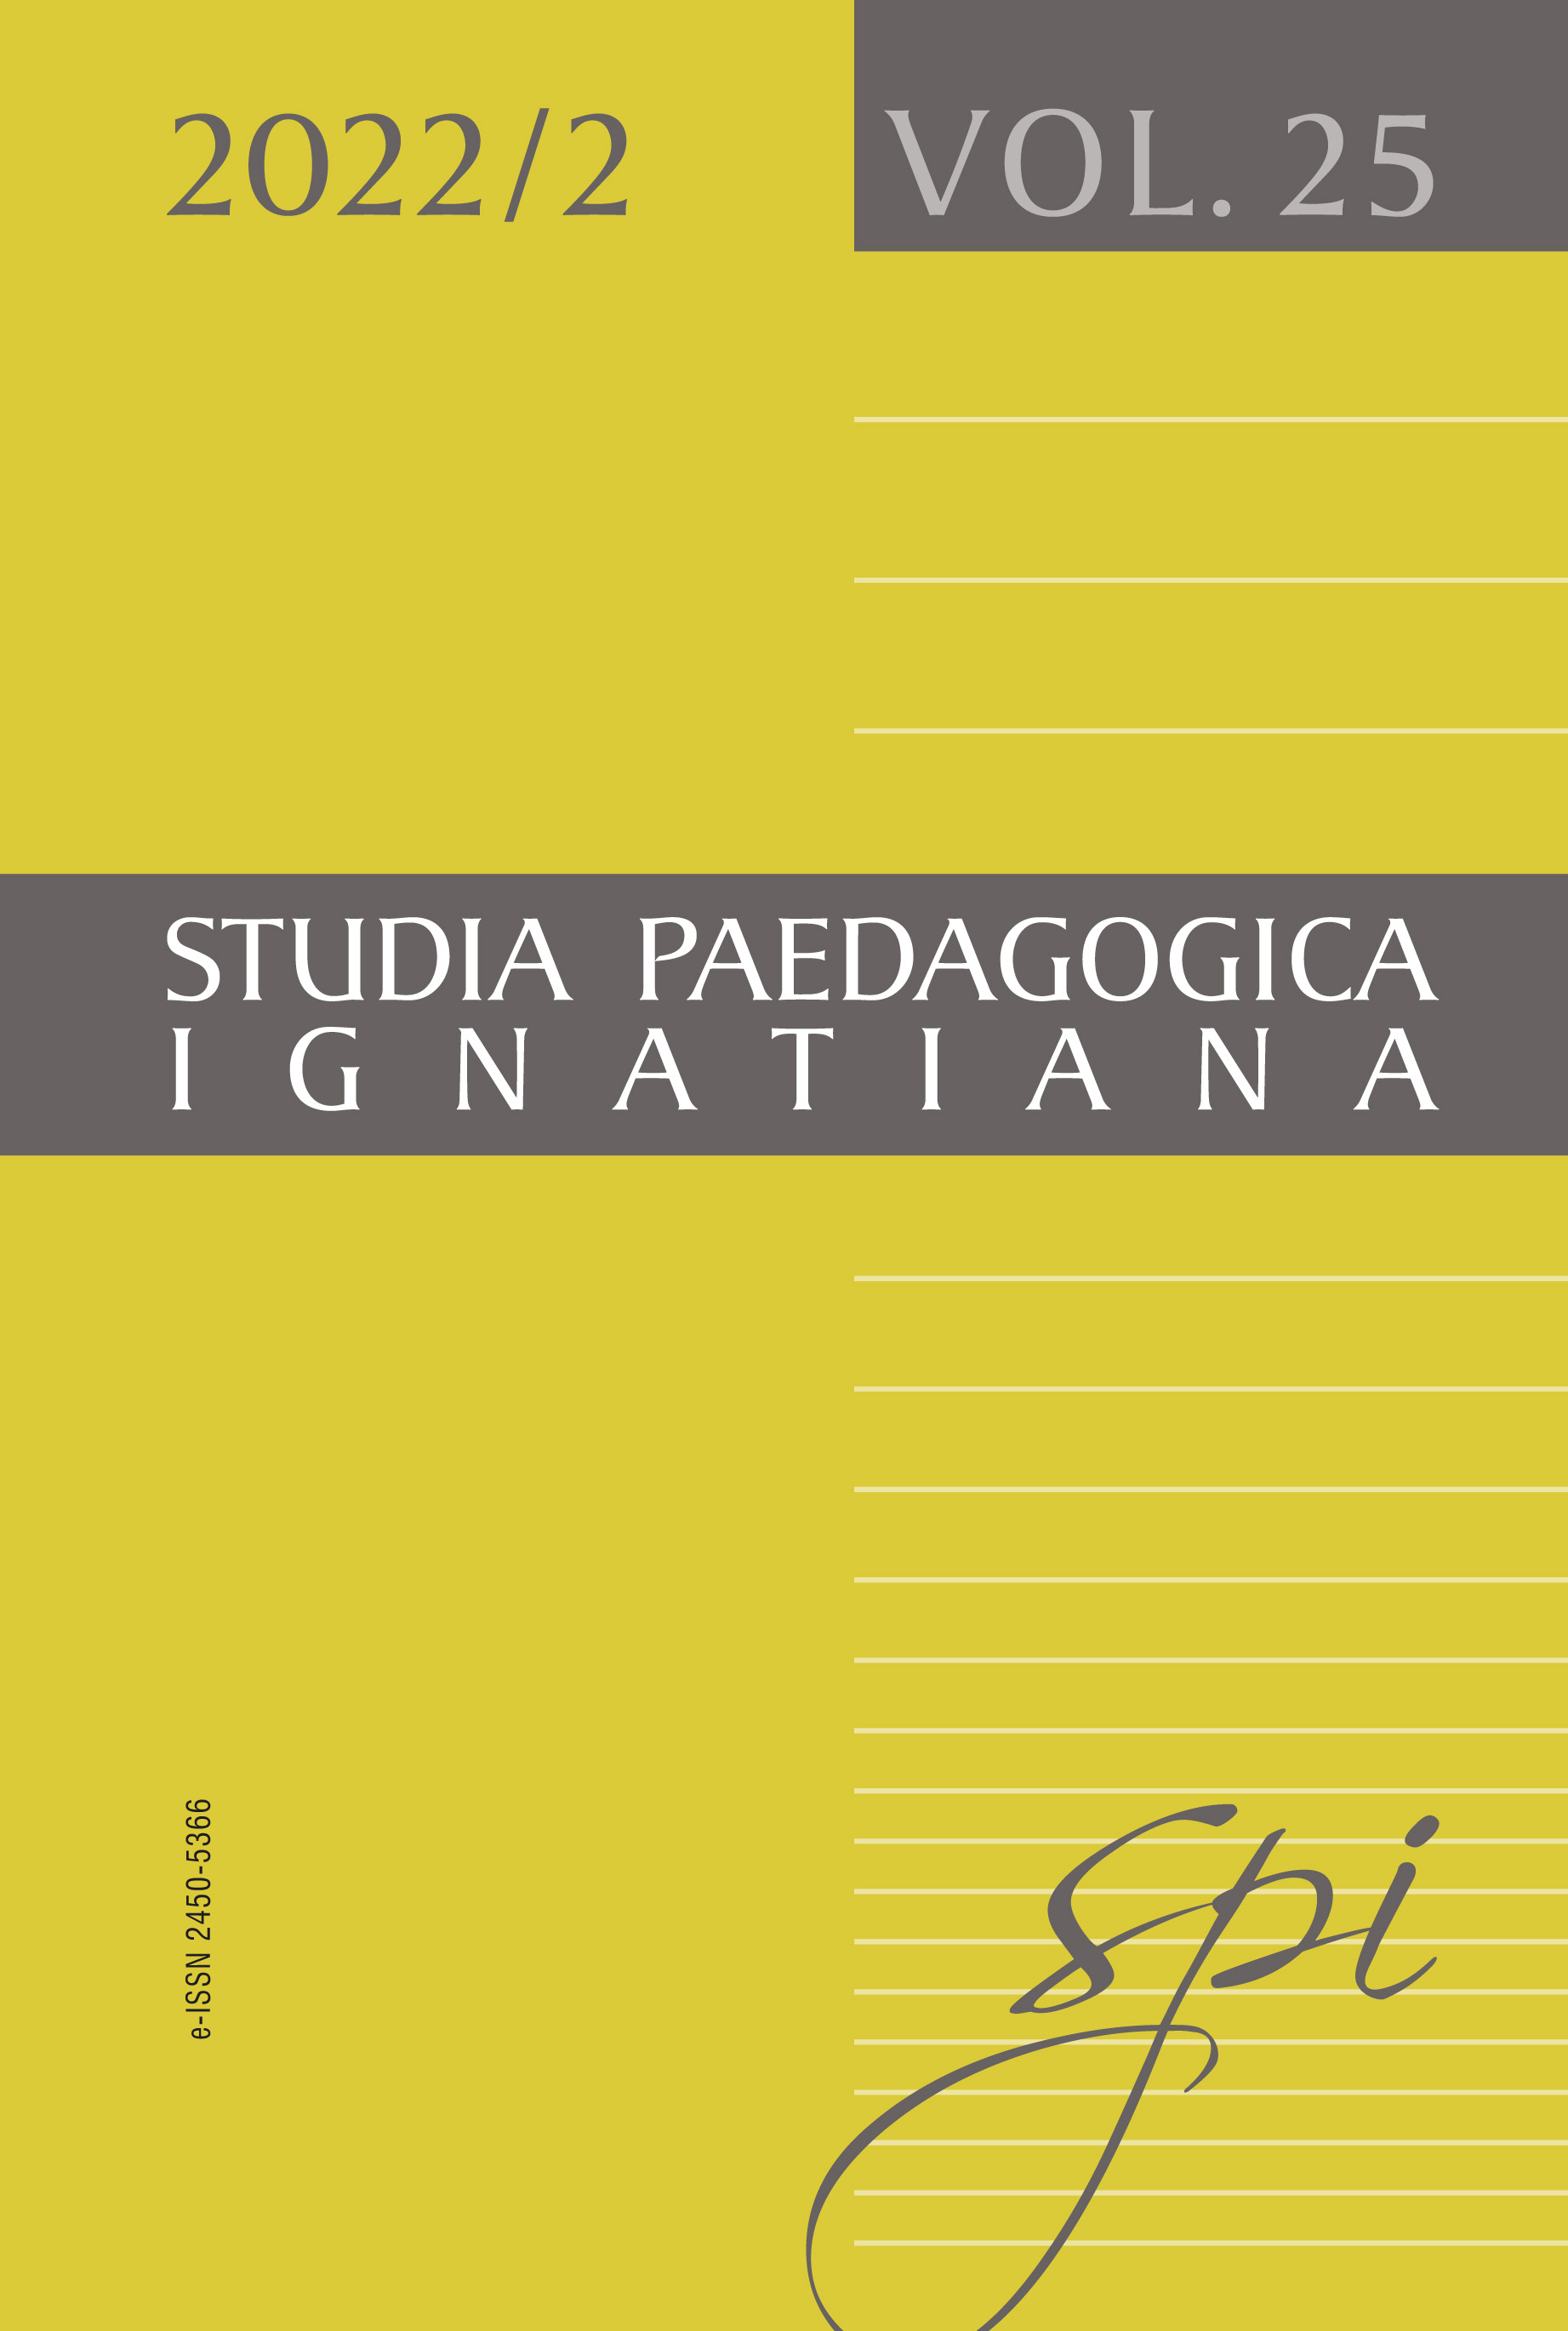 Ludwik Piechnik S.J. (1920–2006): The First Head of the Chair of the History of Education (1997–1998) of the Jesuit University Ignatianum in Krakow Cover Image